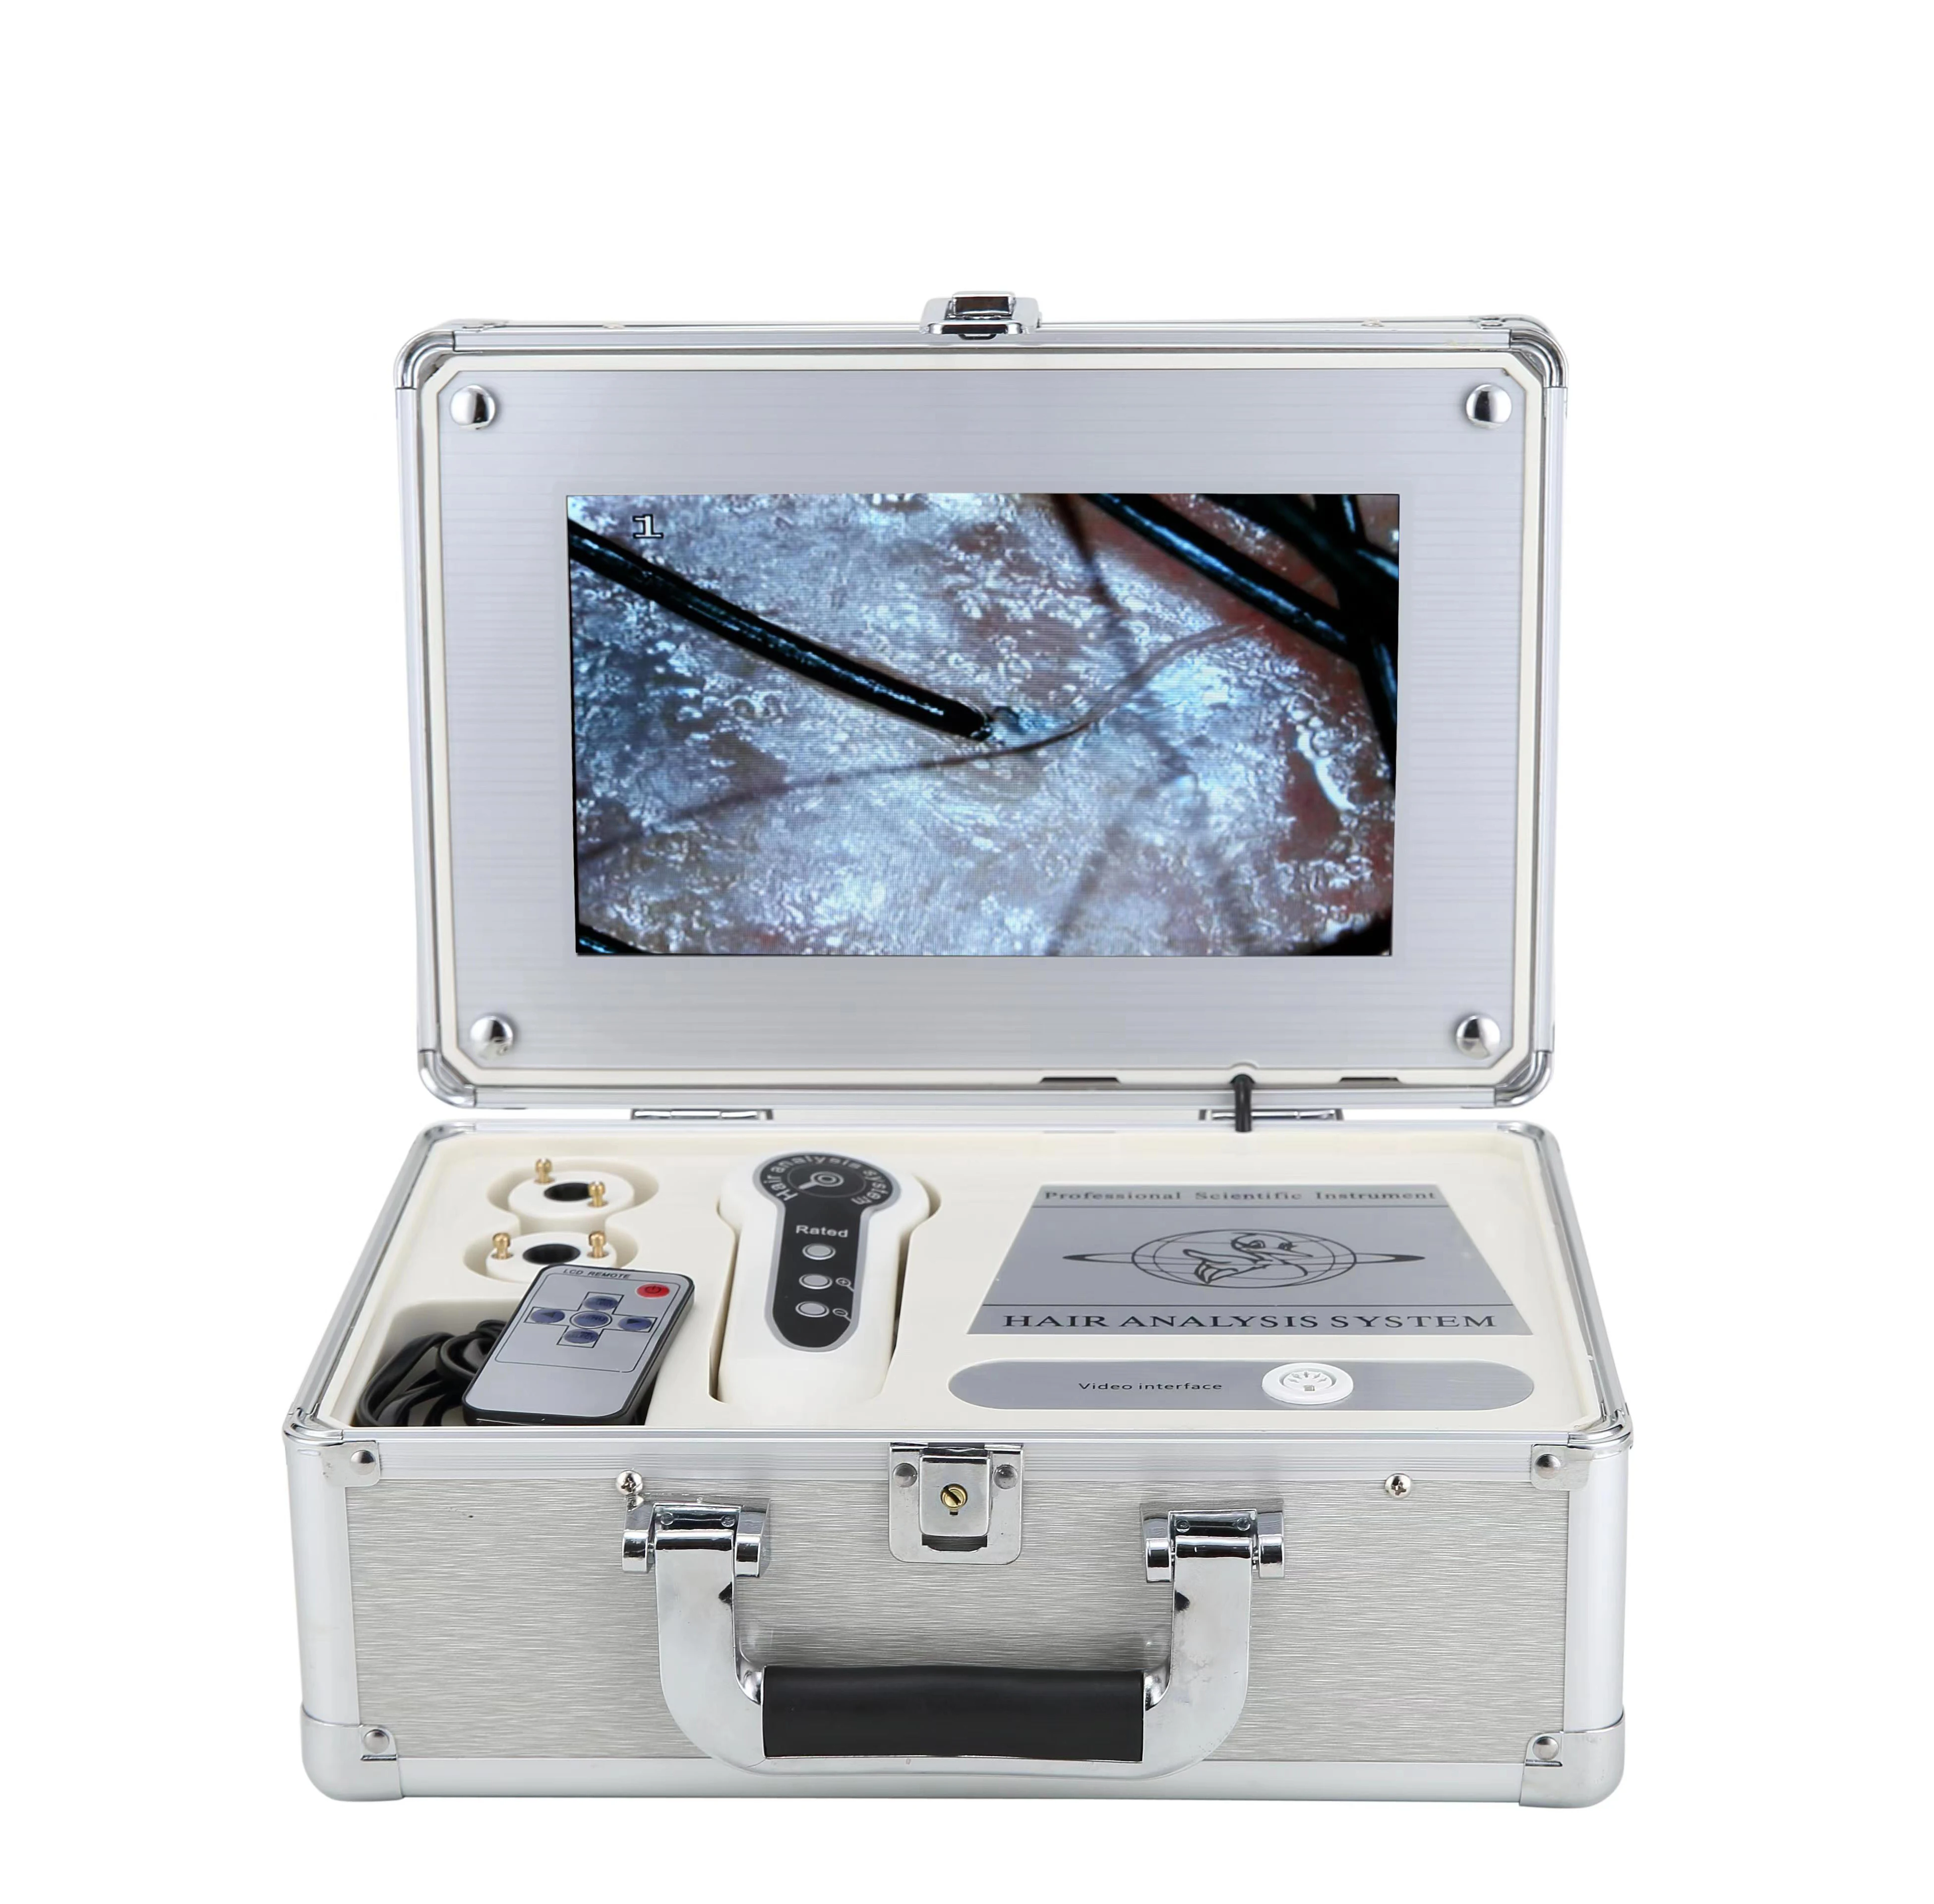 10 Inch Screen Hair Analyzer With A Case For Beauty  Equipment and Home Using skin analyzer